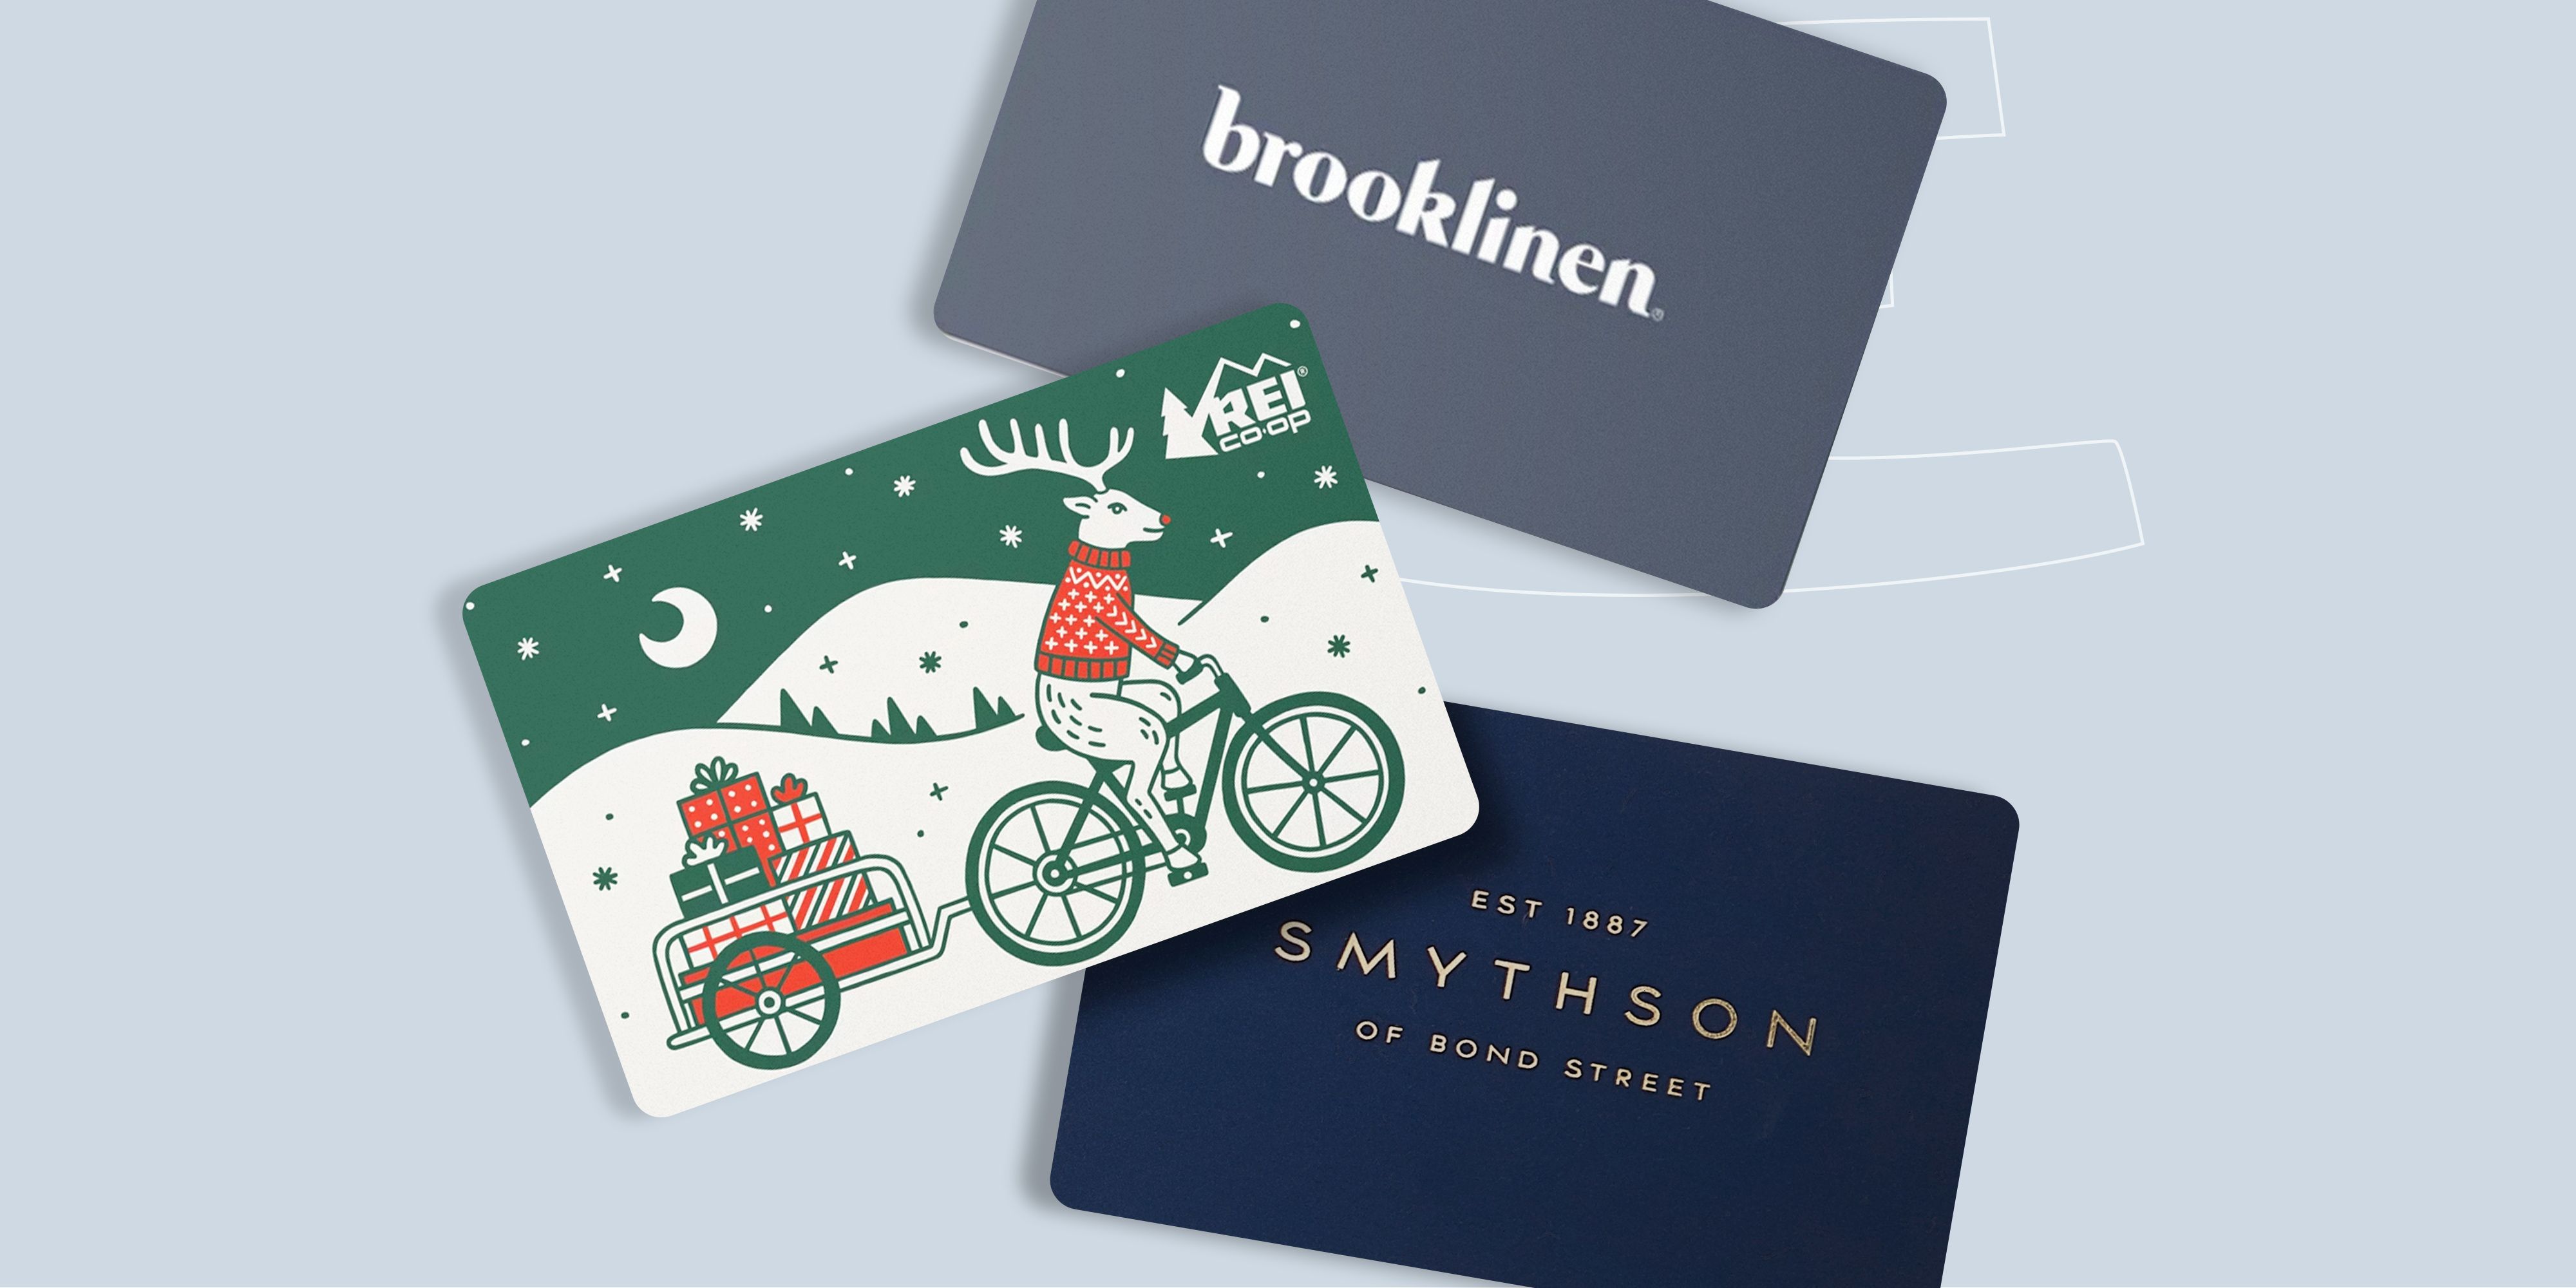 37 Best Gift Card Ideas For Men, Women, Or Couples In 2022